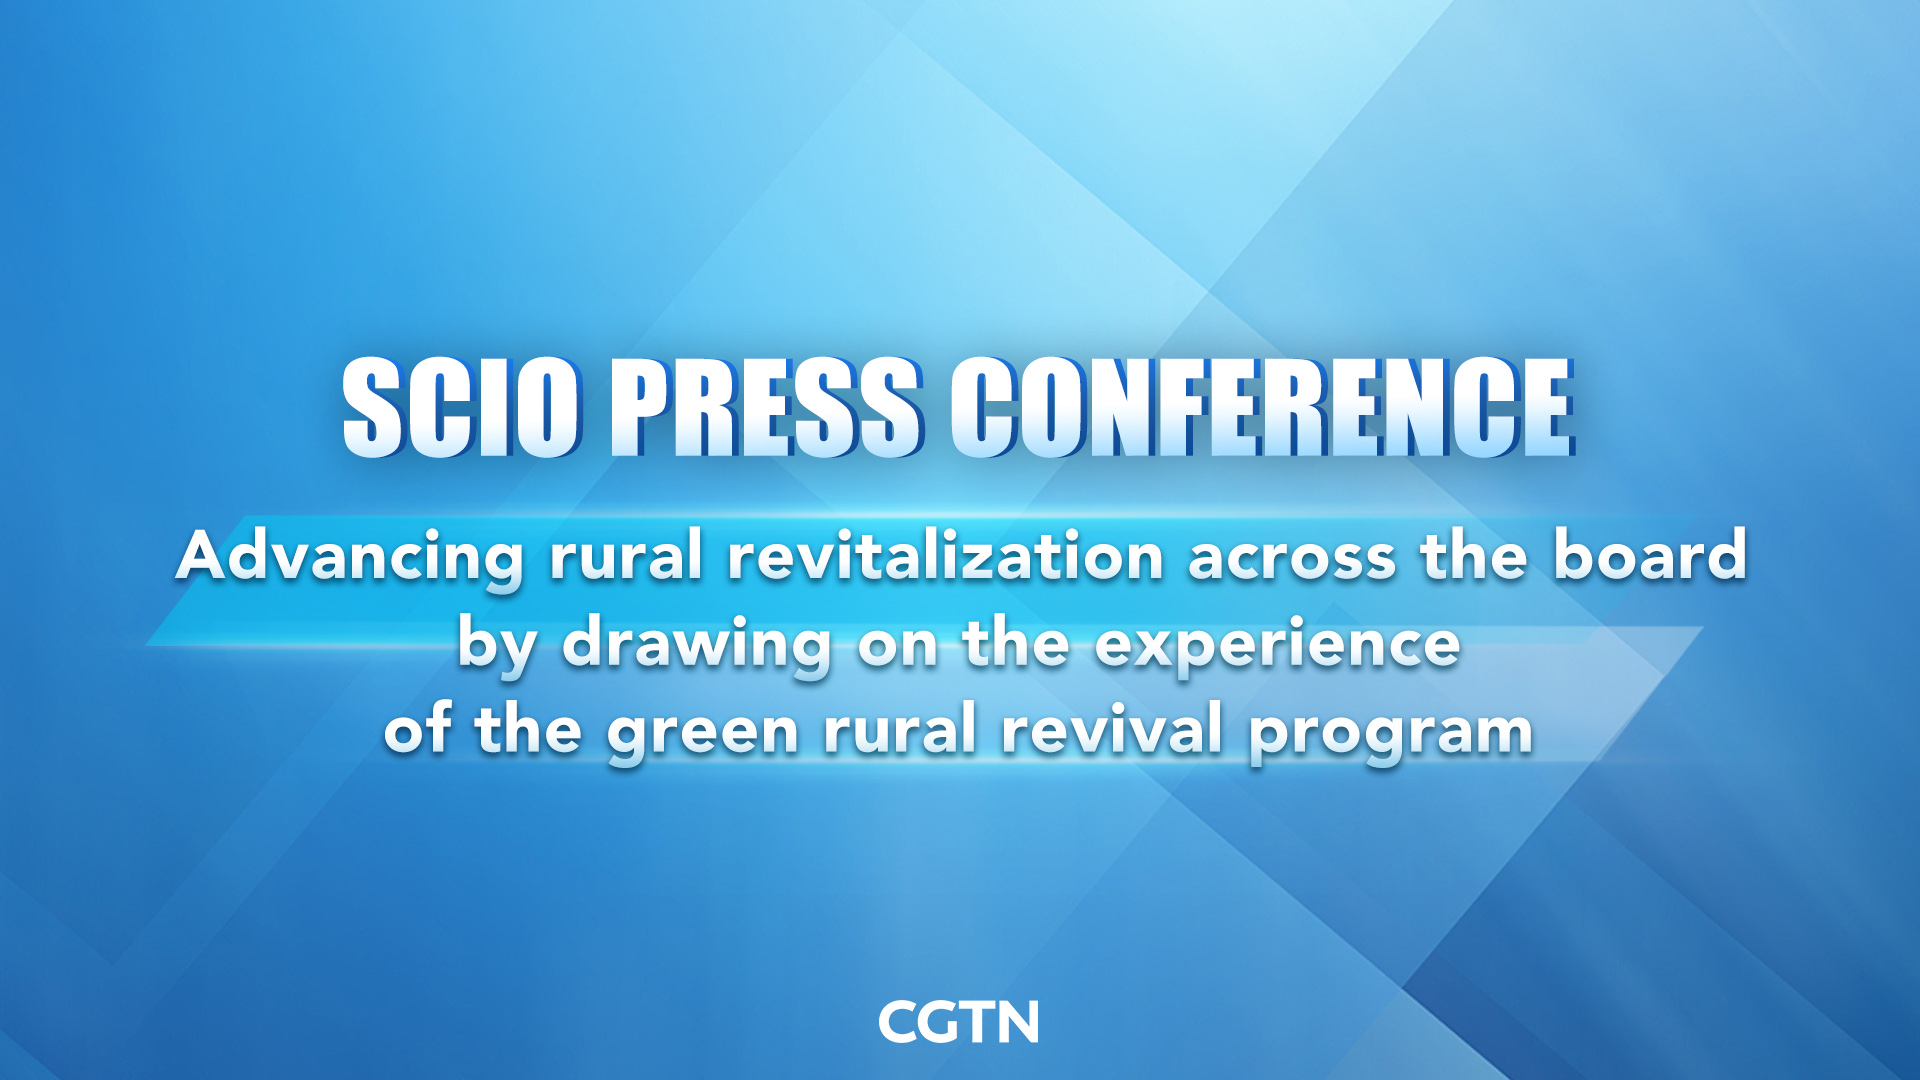 Live: Press conference on advancing rural revitalization across the board